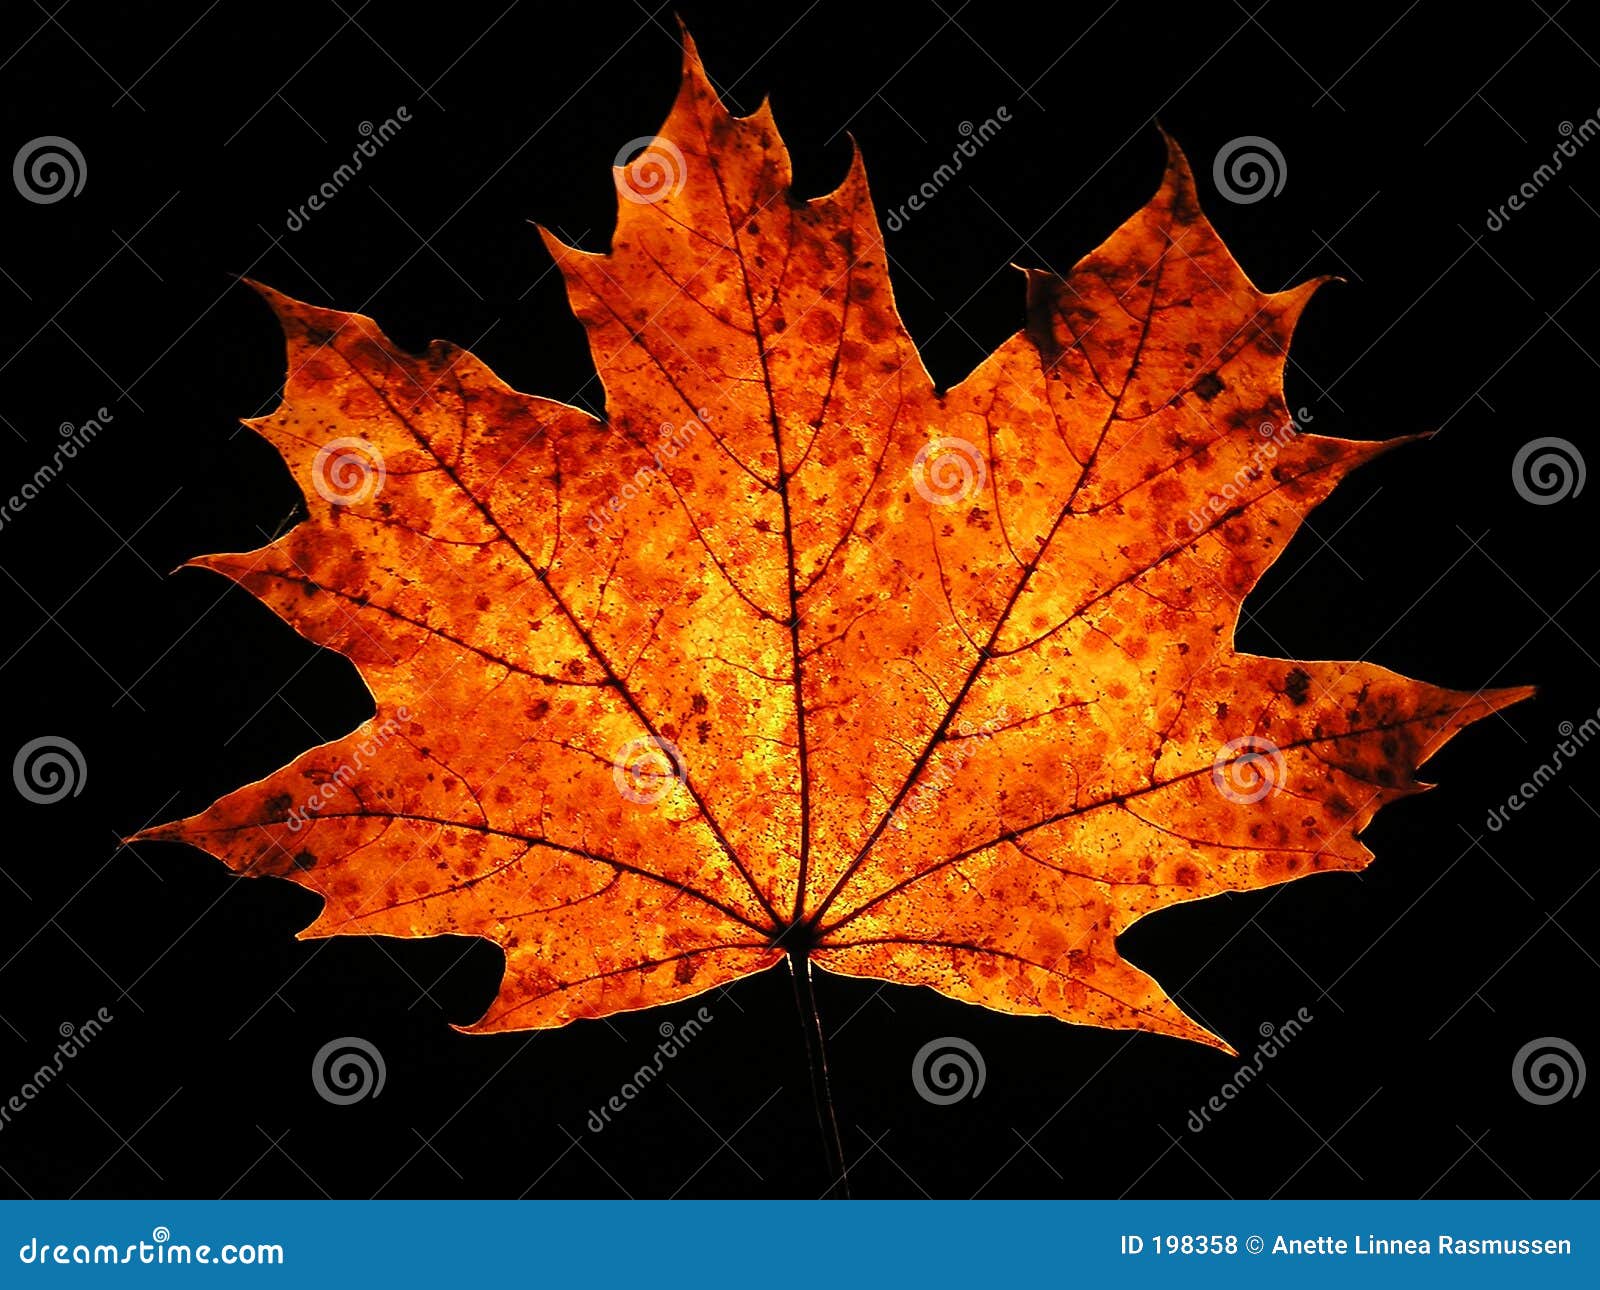 Free Autumn Leaves Photos and Vectors